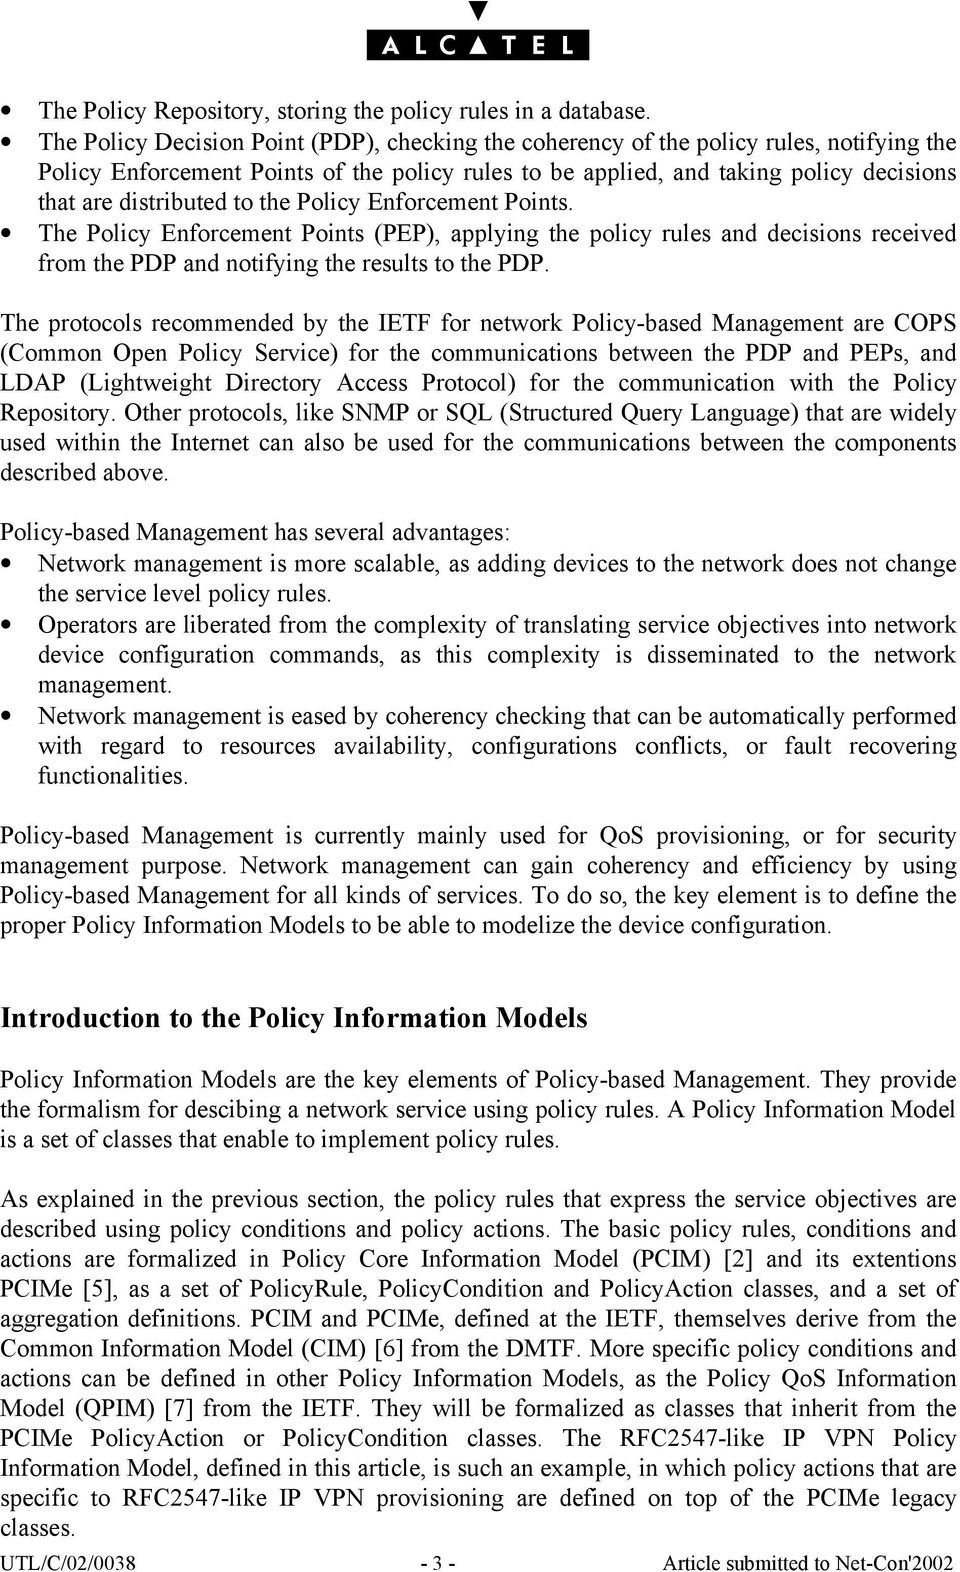 distributed to the Policy Enforcement Points. The Policy Enforcement Points (PEP), applying the policy rules and decisions received from the PDP and notifying the results to the PDP.